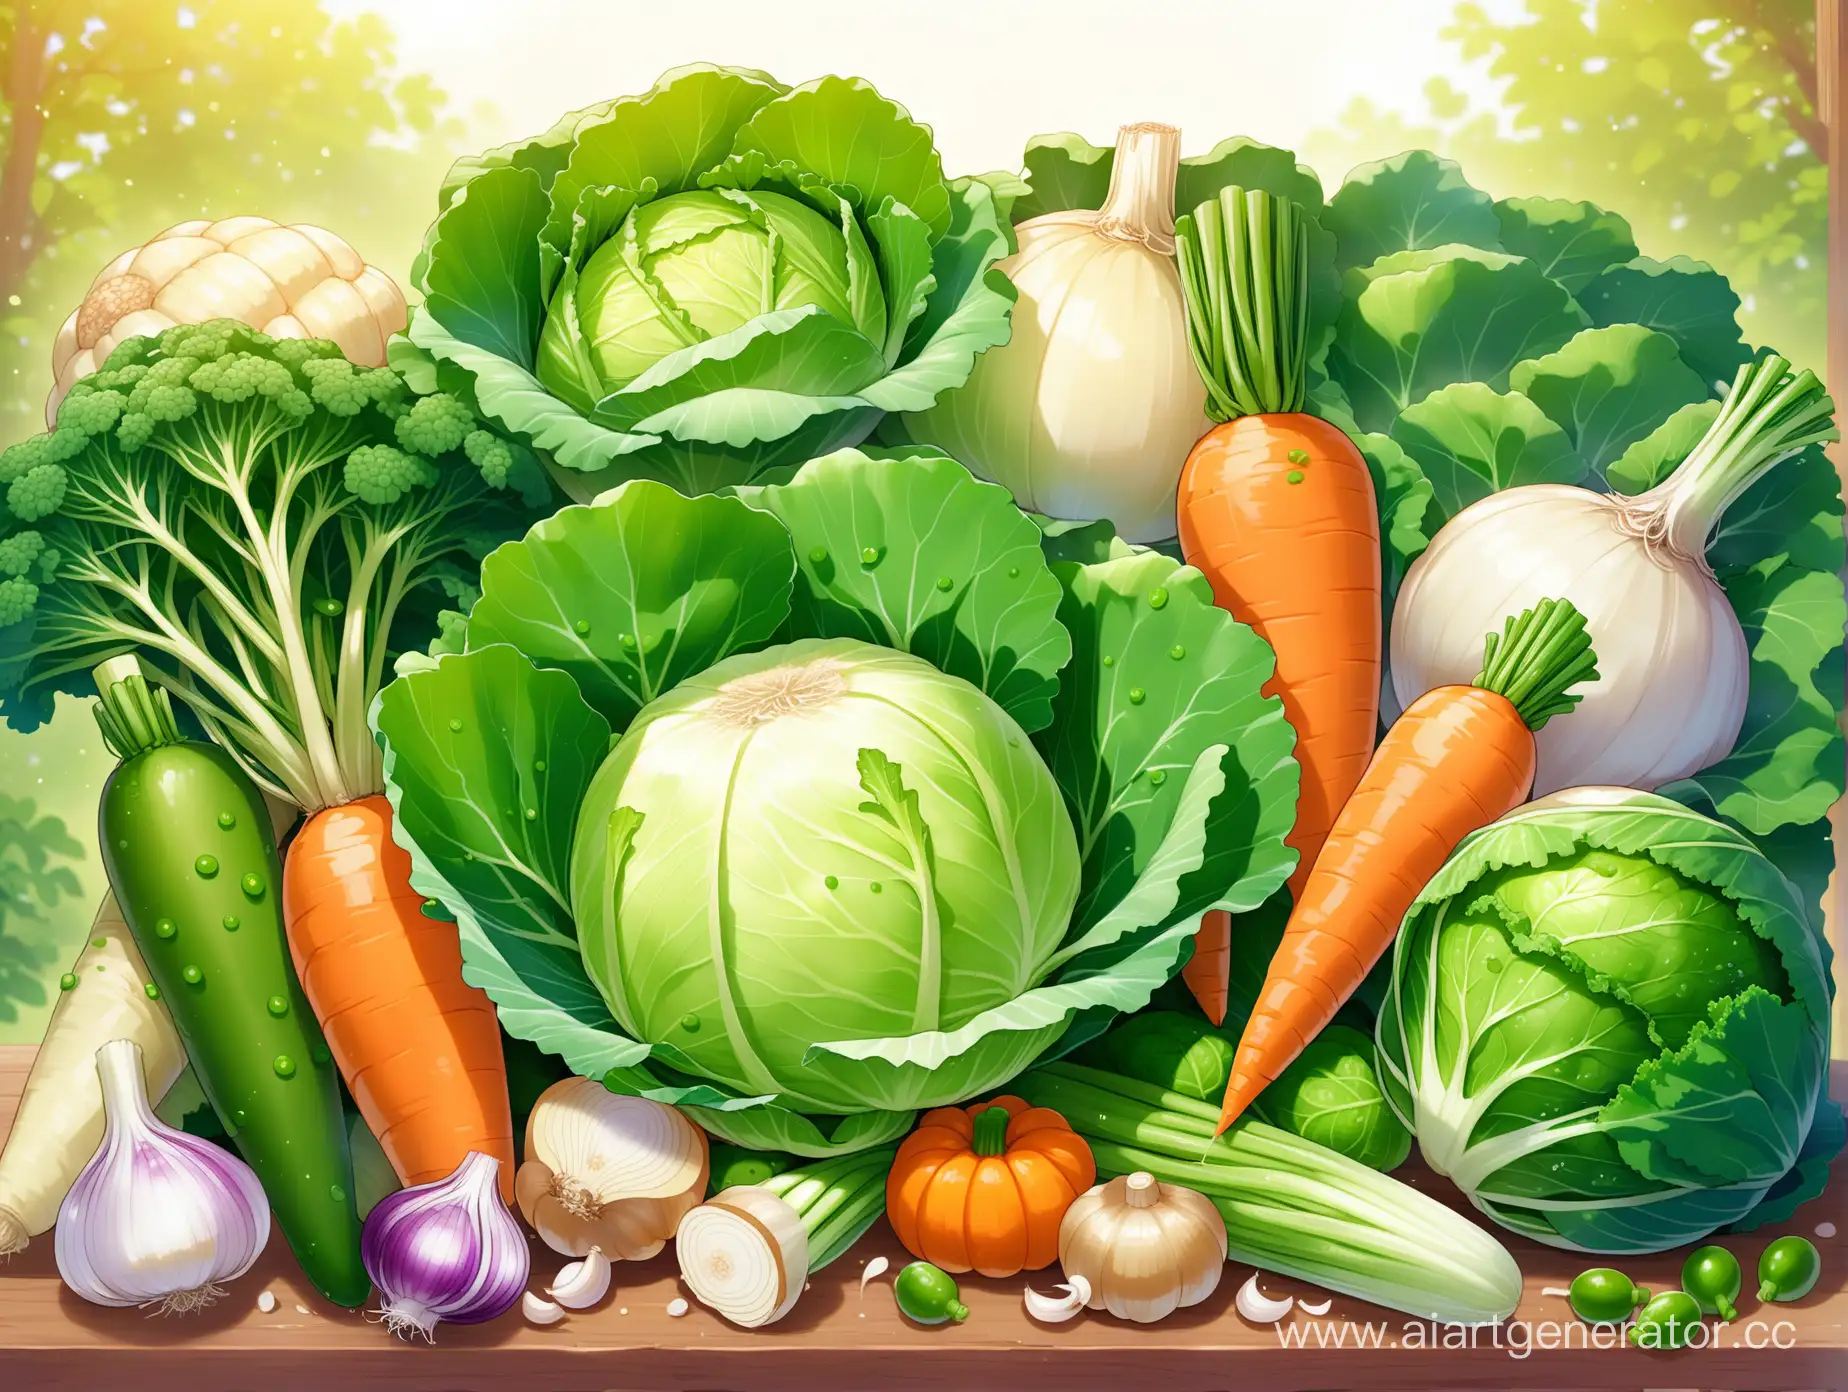 Abundant-Healing-Vegetable-Garden-with-Cabbage-Carrots-Cucumbers-Onions-Garlic-Parsnips-Peas-and-Pumpkins